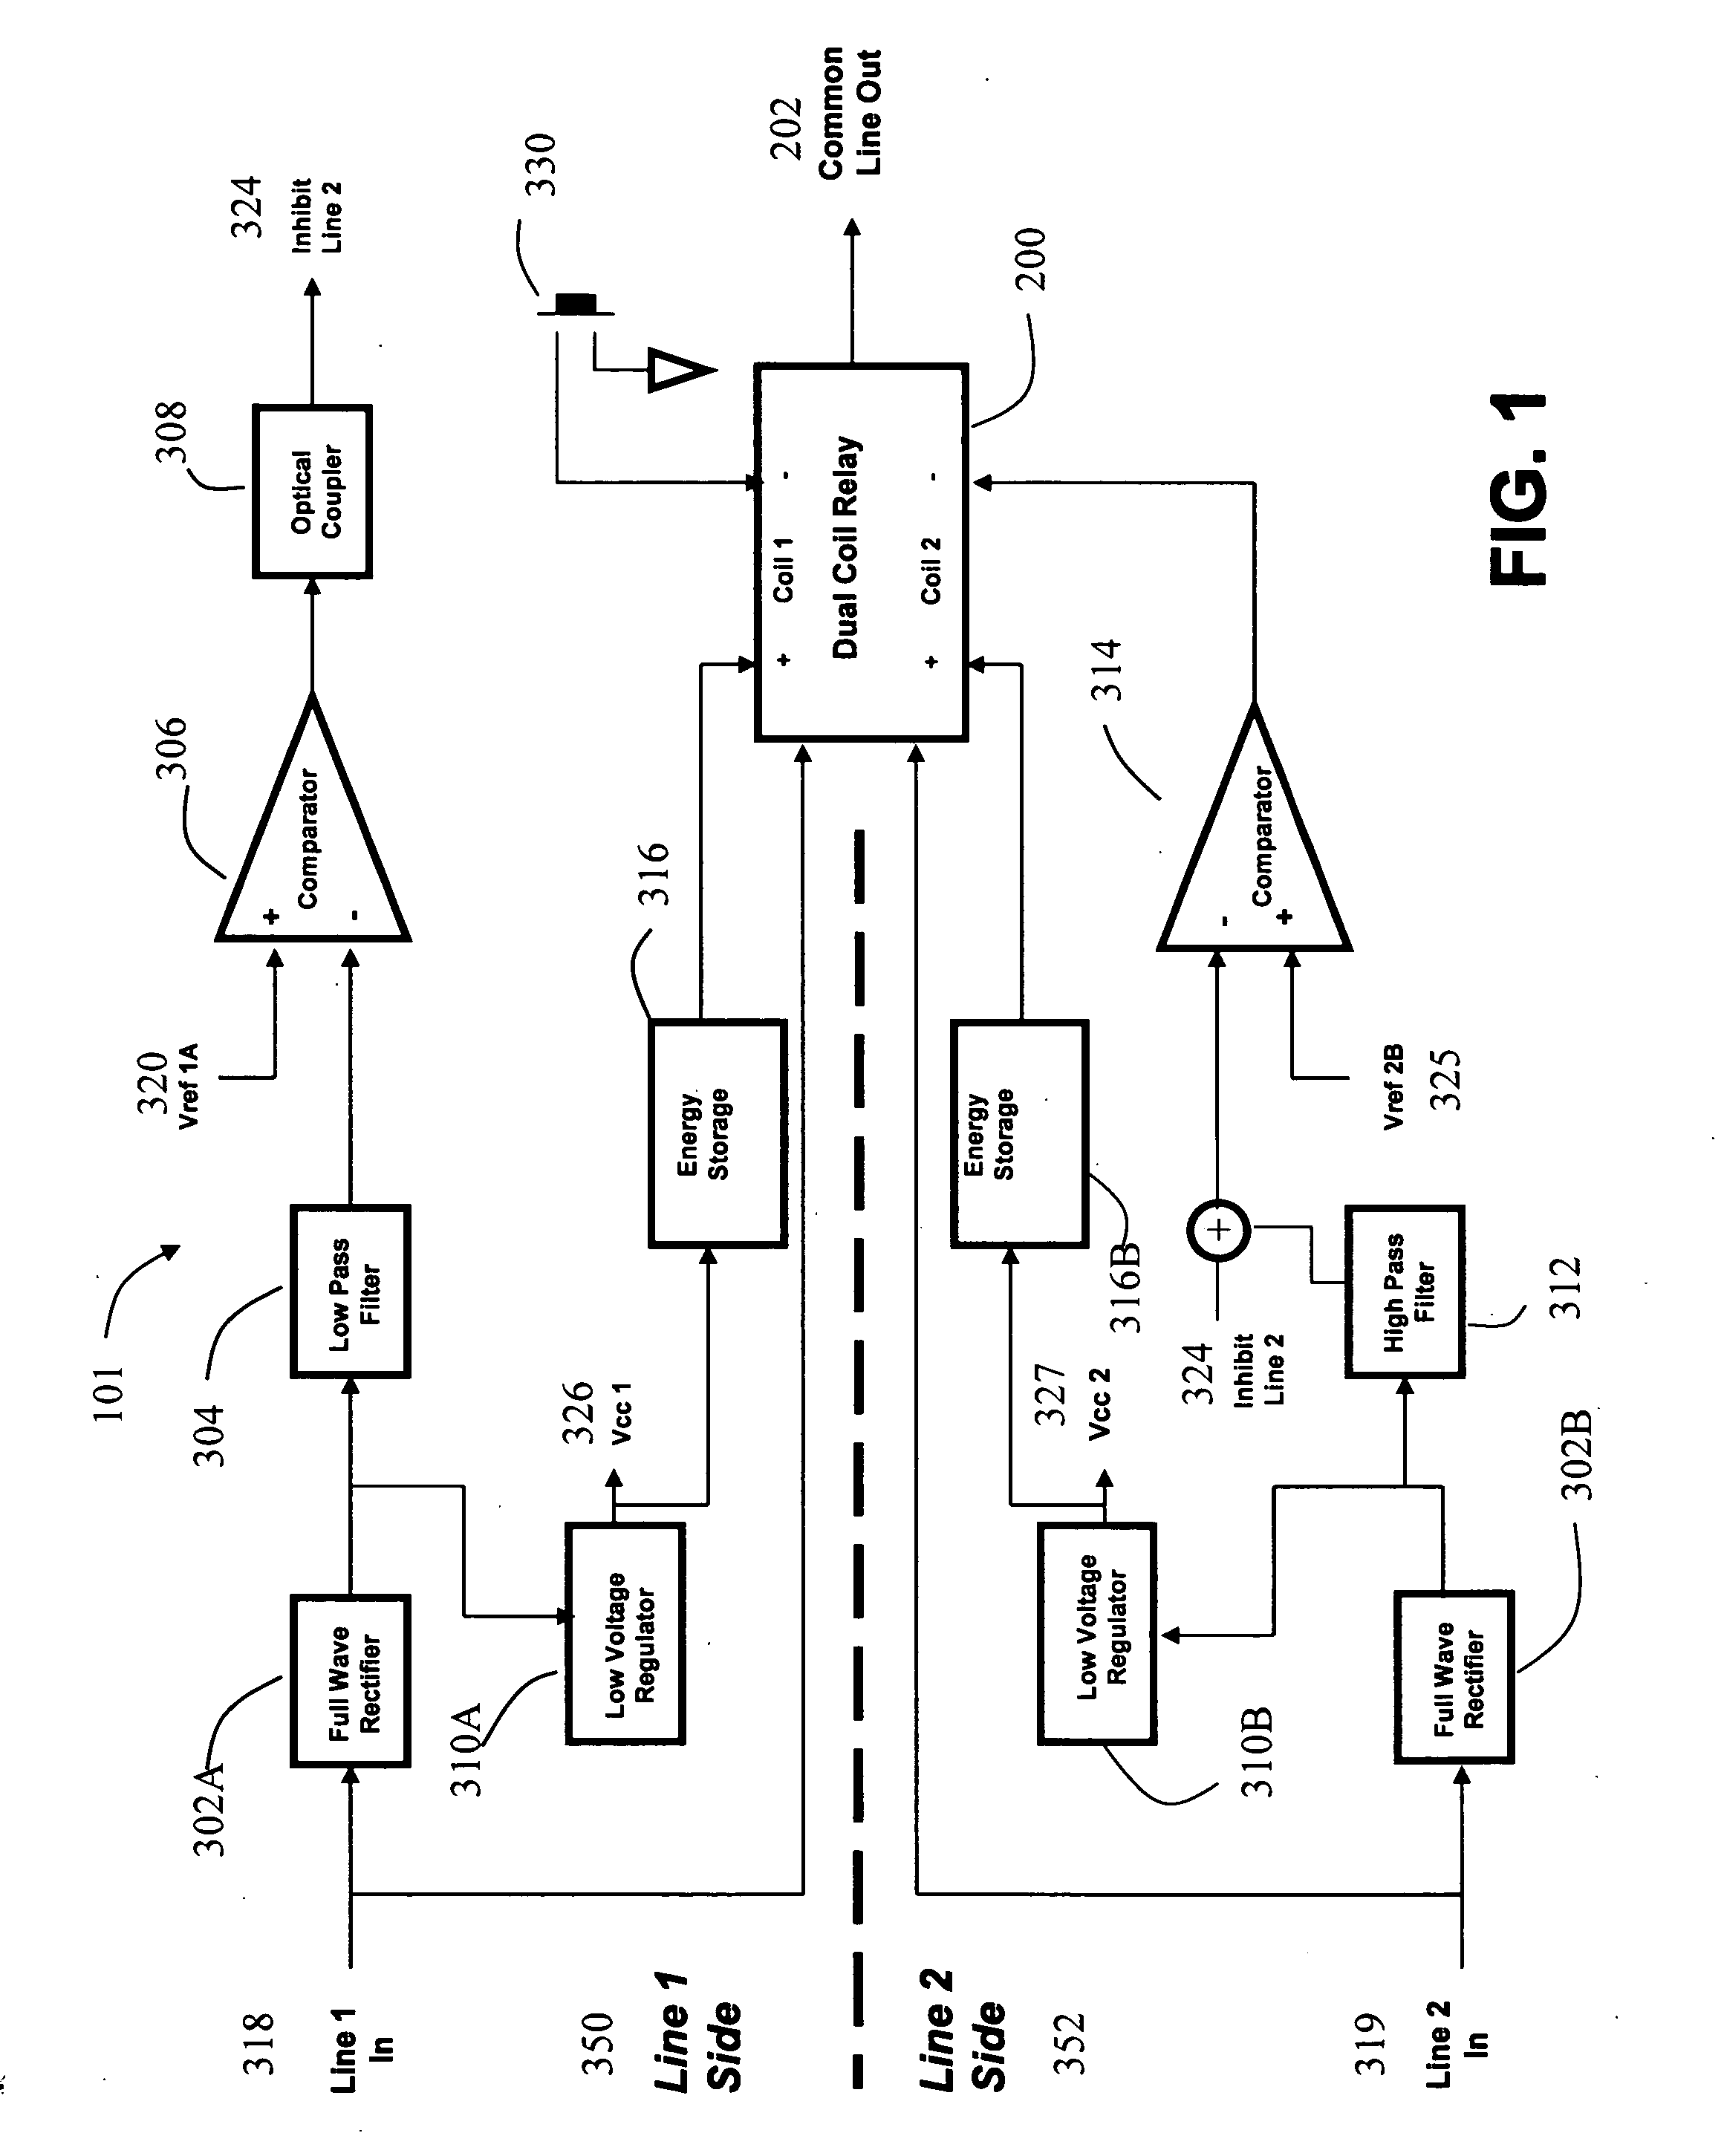 Method and apparatus for alternatively switching between phone service lines